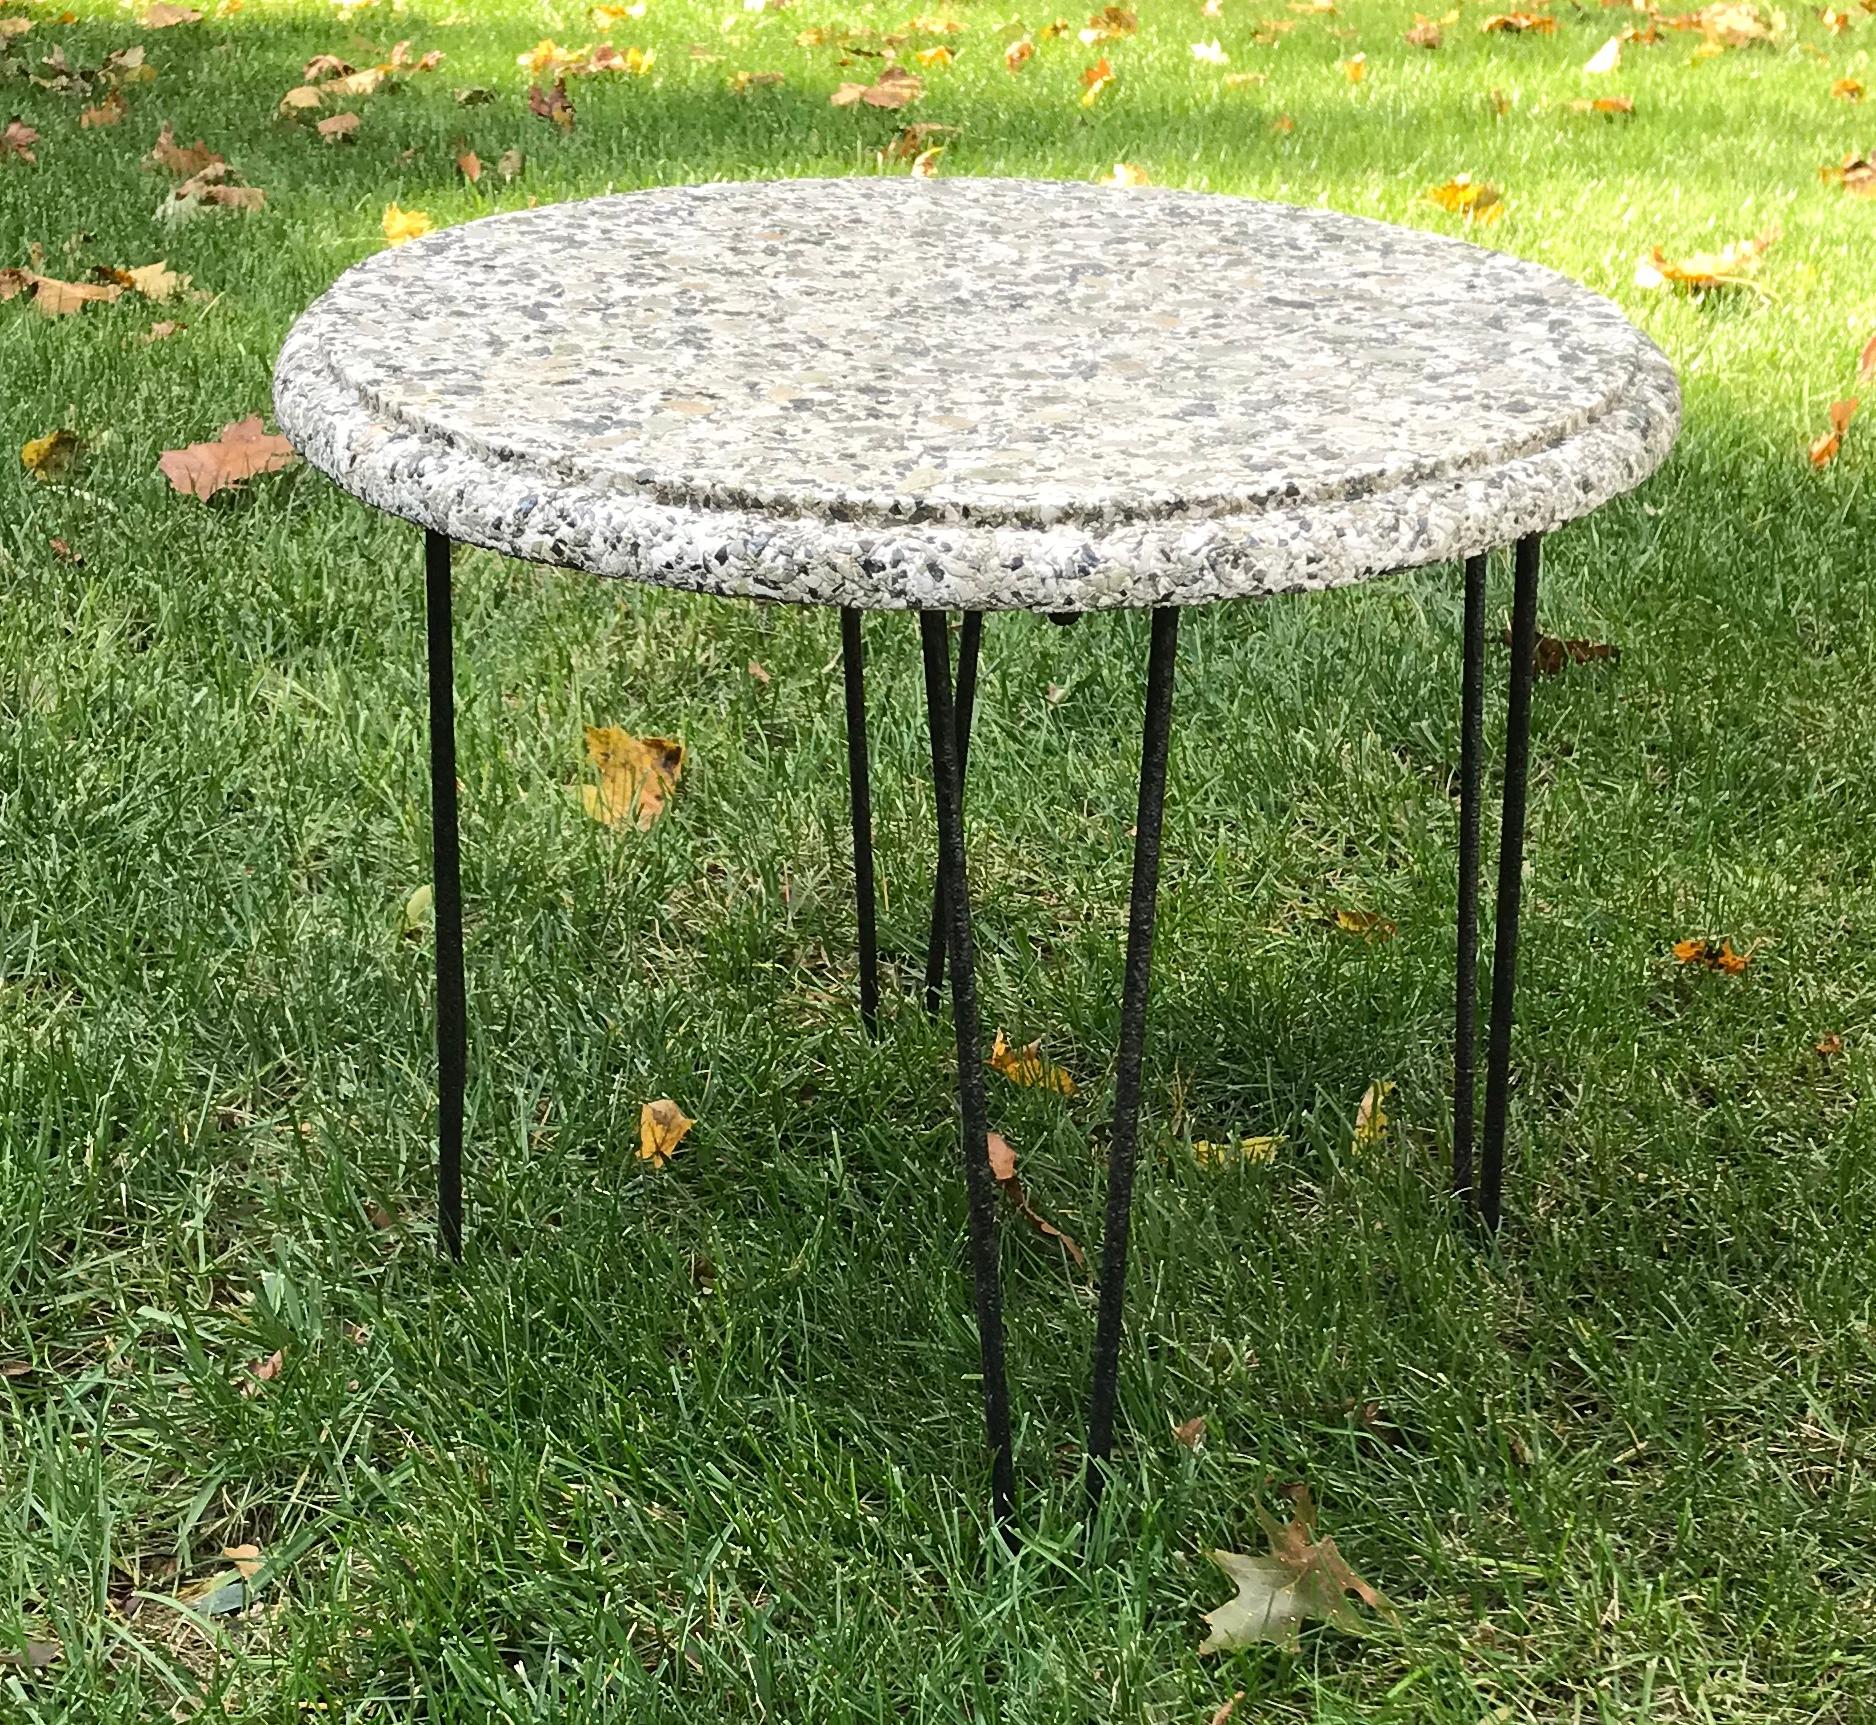 Cool small mid century stone top round side table with wrought iron hairpin legs, 1950s. Patio or poolside side table, can also be used as a small coffee table. One of the hairpin legs is slightly bent, hardly noticeable, please see photo.